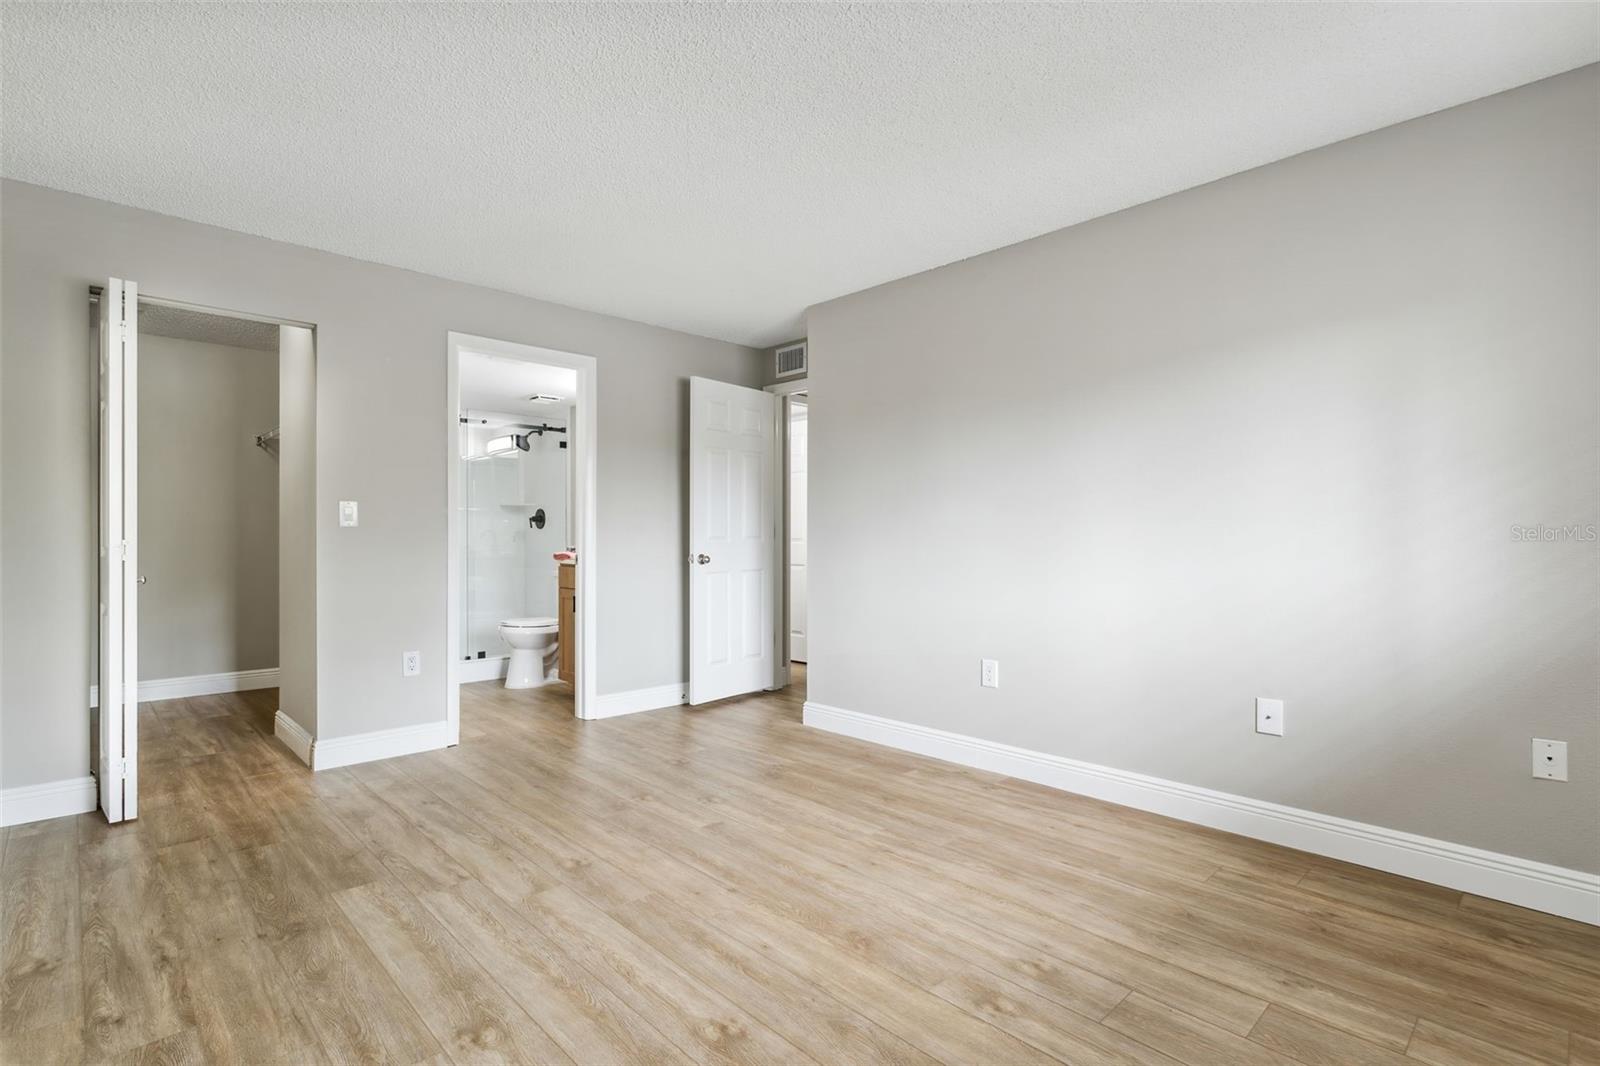 A view of the Primary bedroom shows how light and airy the room is.  The walk in closet is large and the en suite bathroom is a spa like surprise!